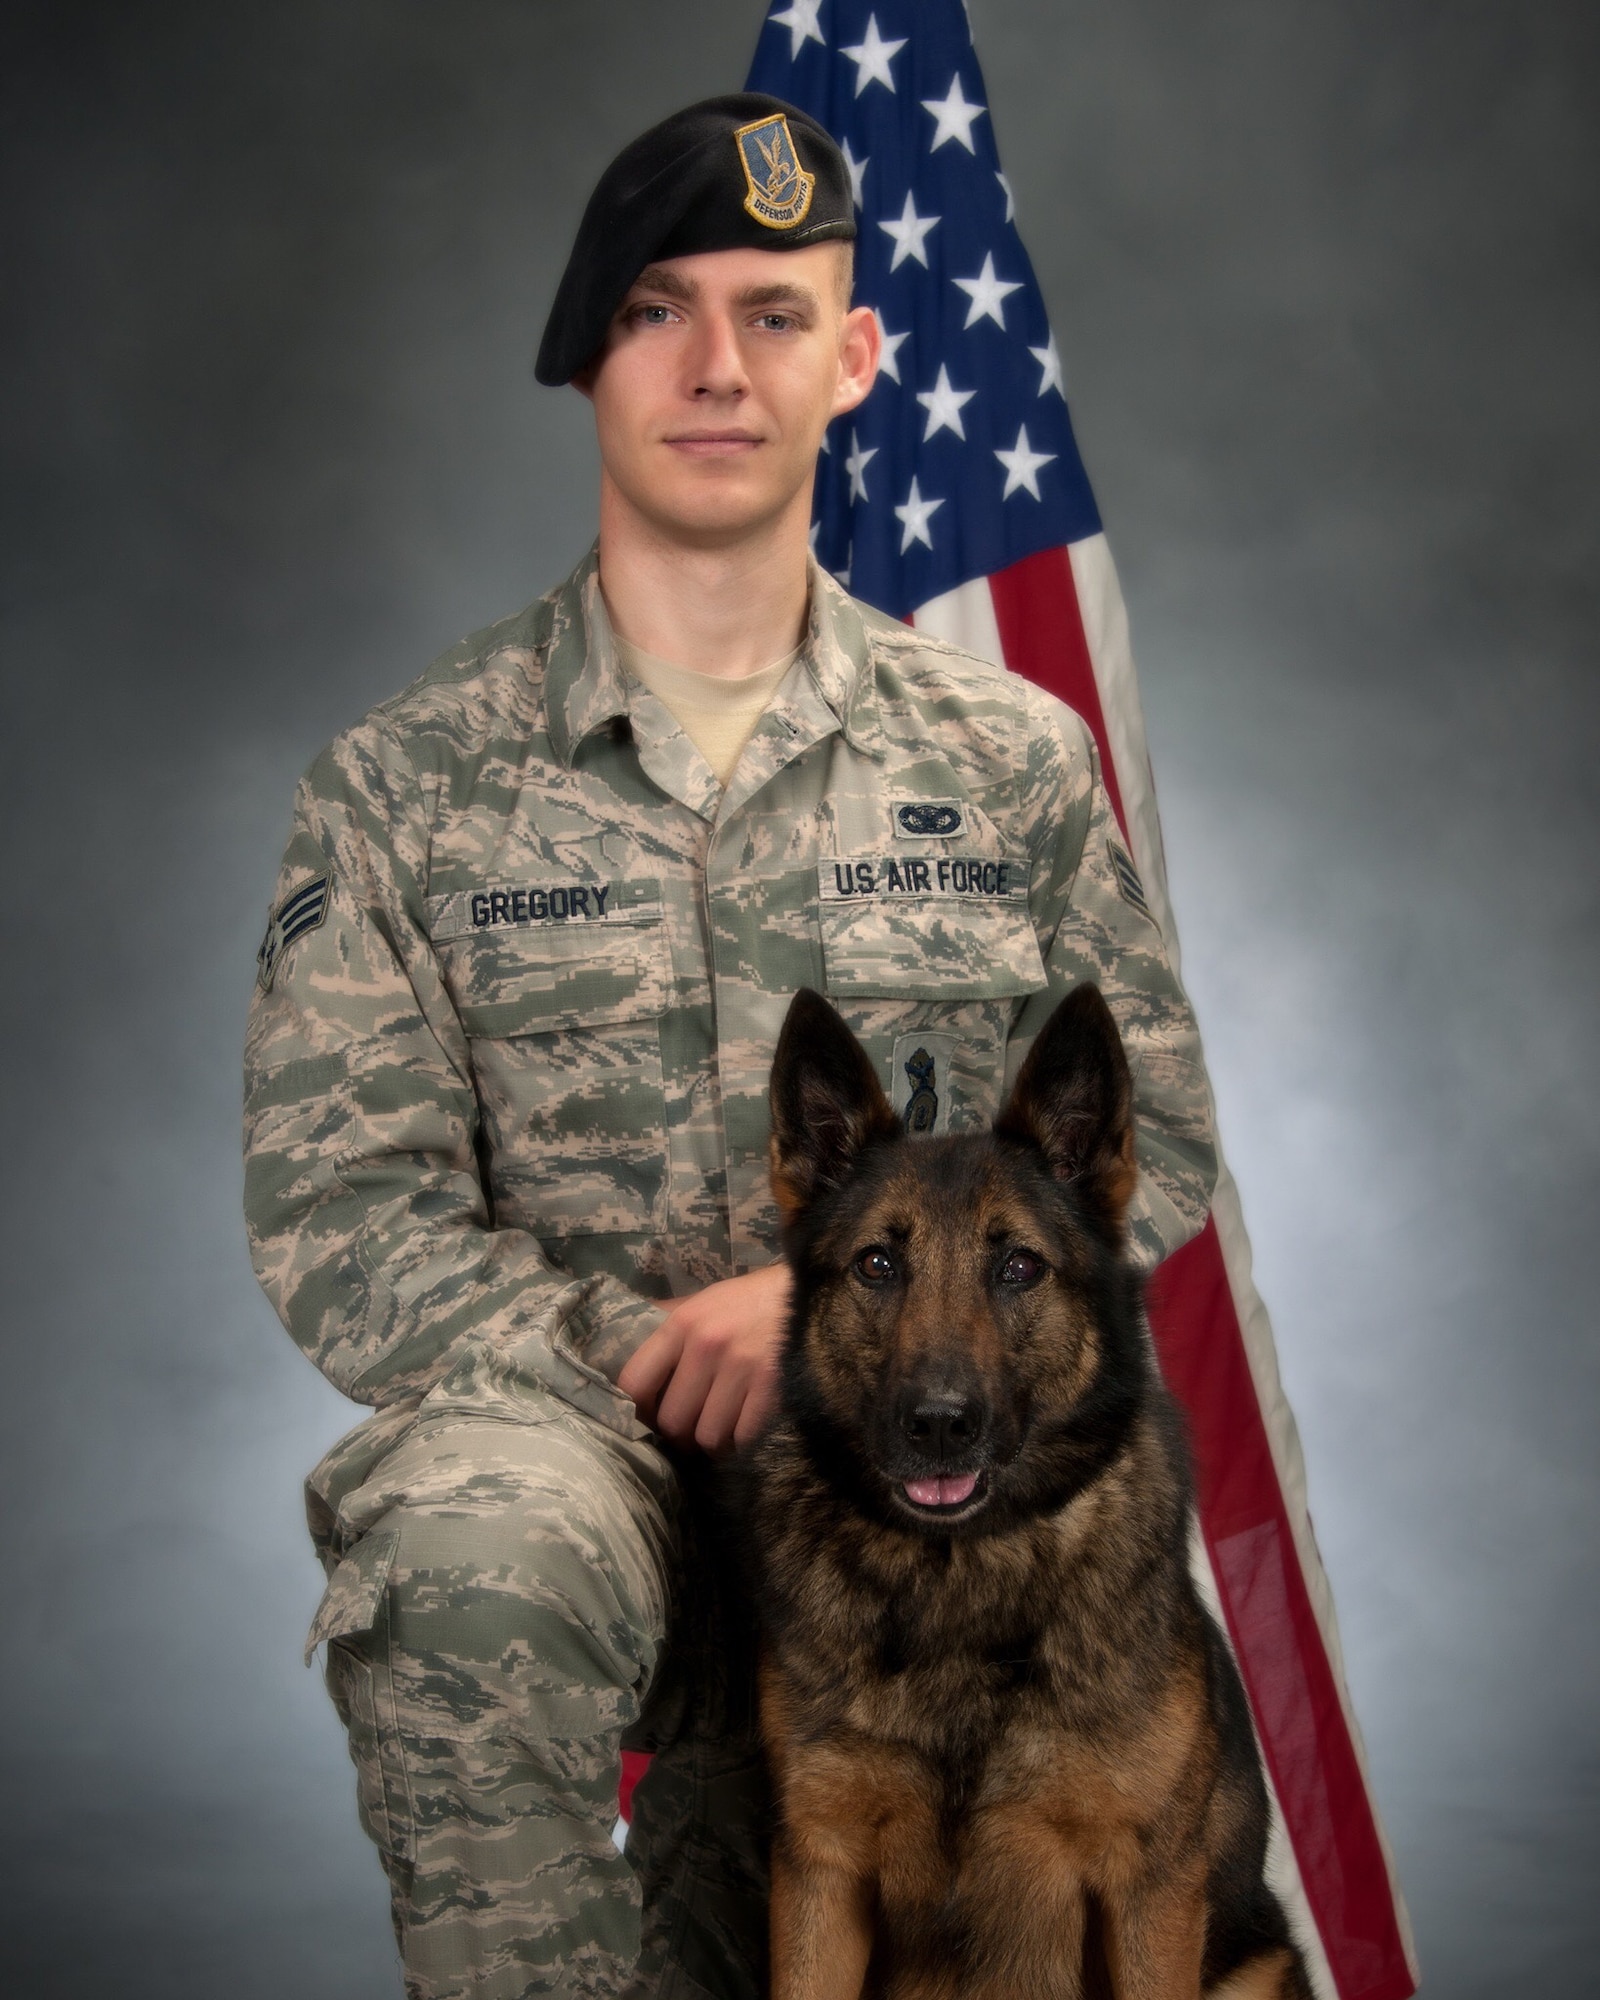 Senior Airman Clinton Gregory, 42nd Security Forces Squadron military working dog handler, with his MWD Elza at Maxwell Air Force Base, Ala. Elza succumbed to cancer in early July 2017 months before she was set to retire. (Courtesy photo)